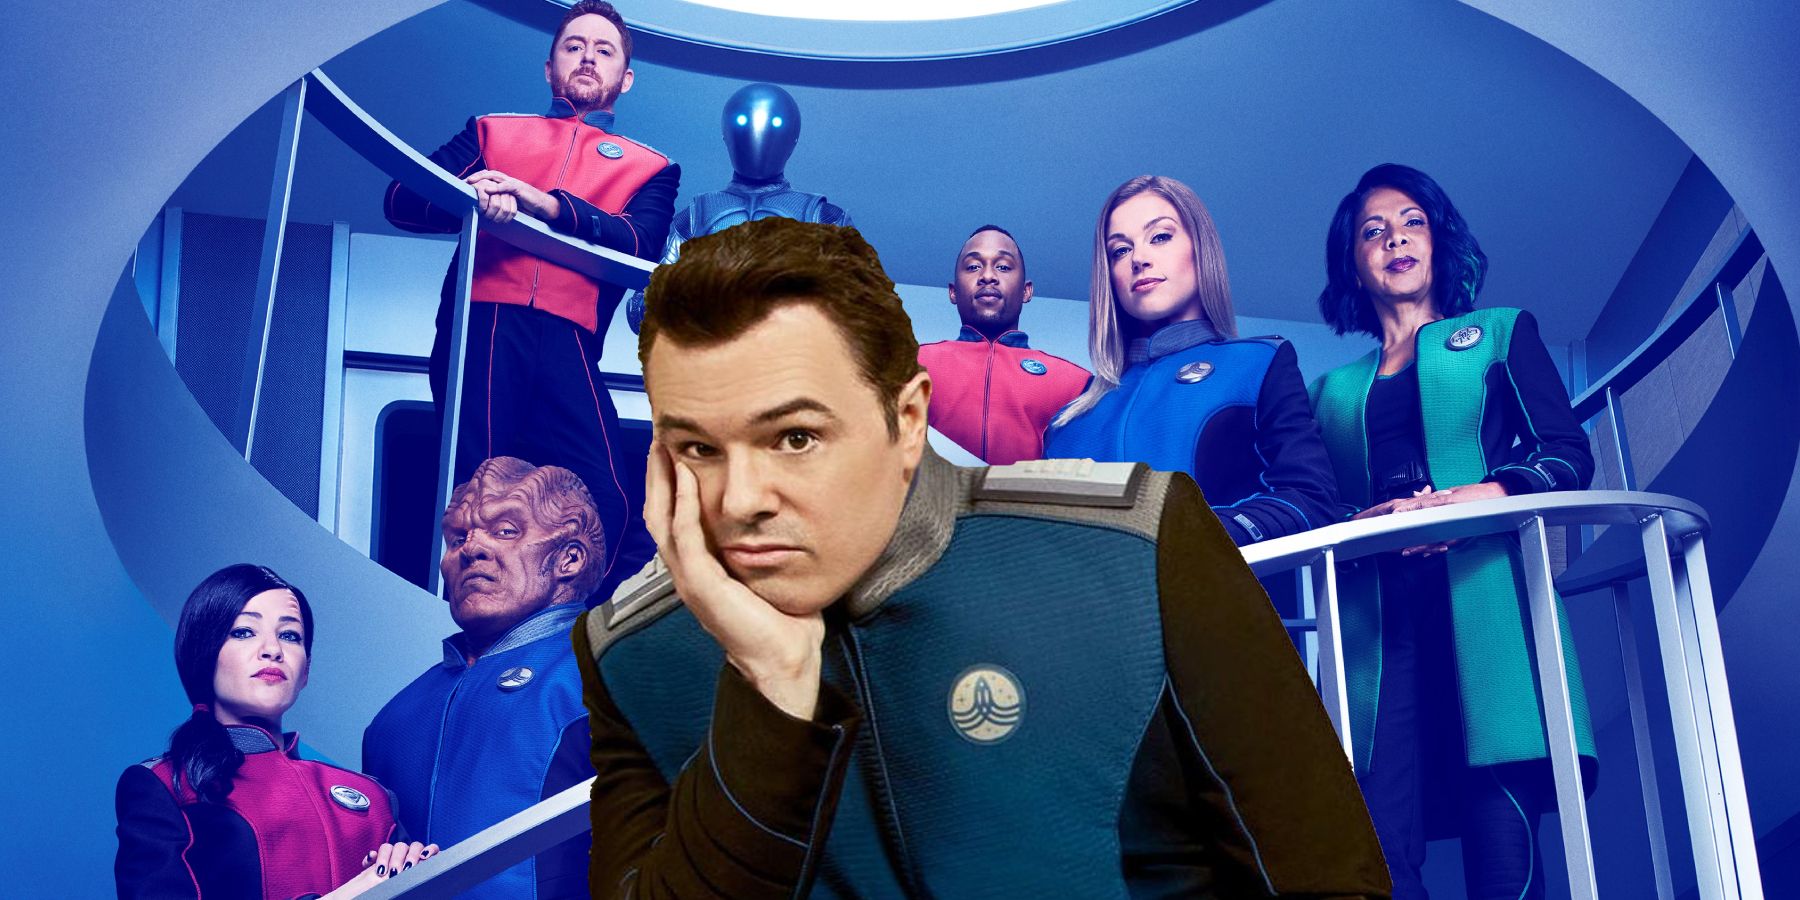 Seth MacFarlane and the cast of The Orville